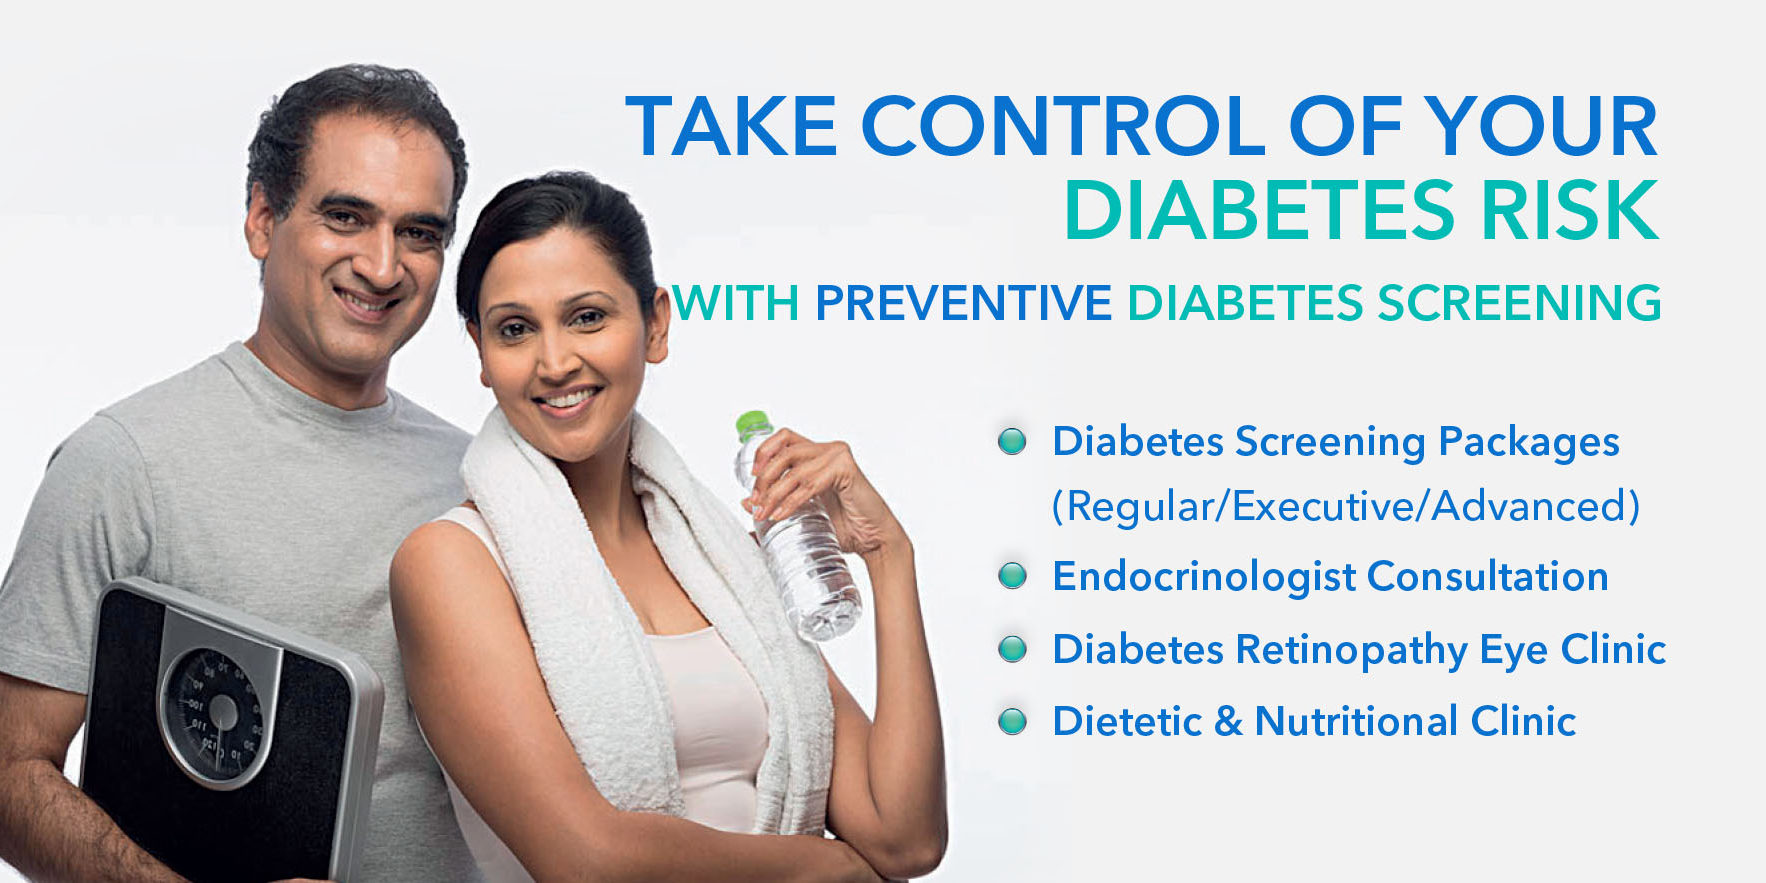 diabetes and endocrinology clinic hull)